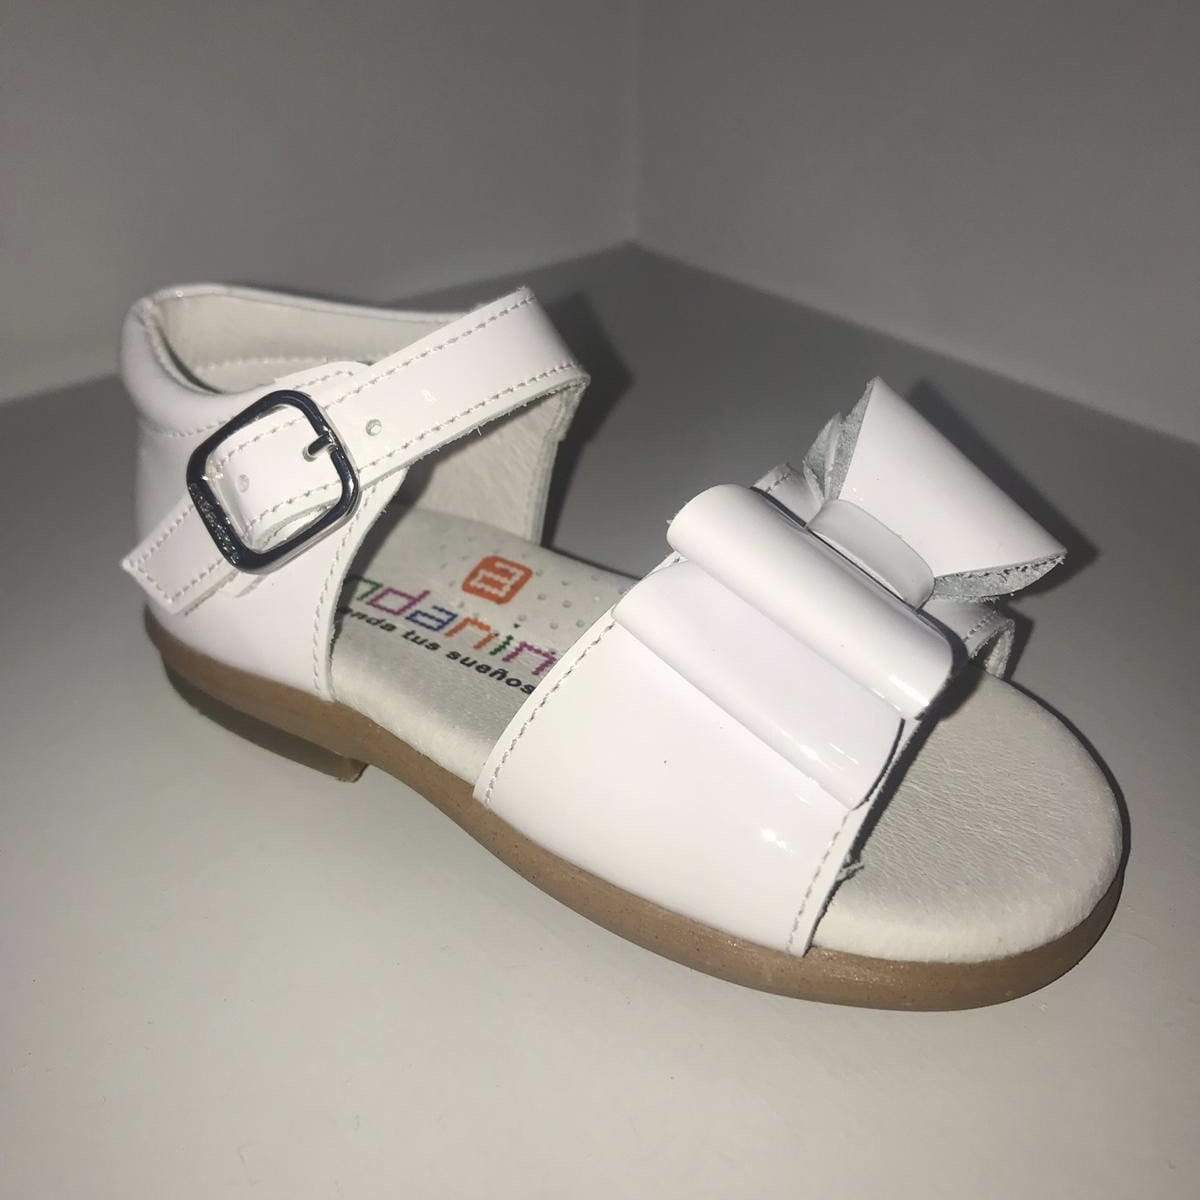 ANDANINES - Patent Leather Sandal - White